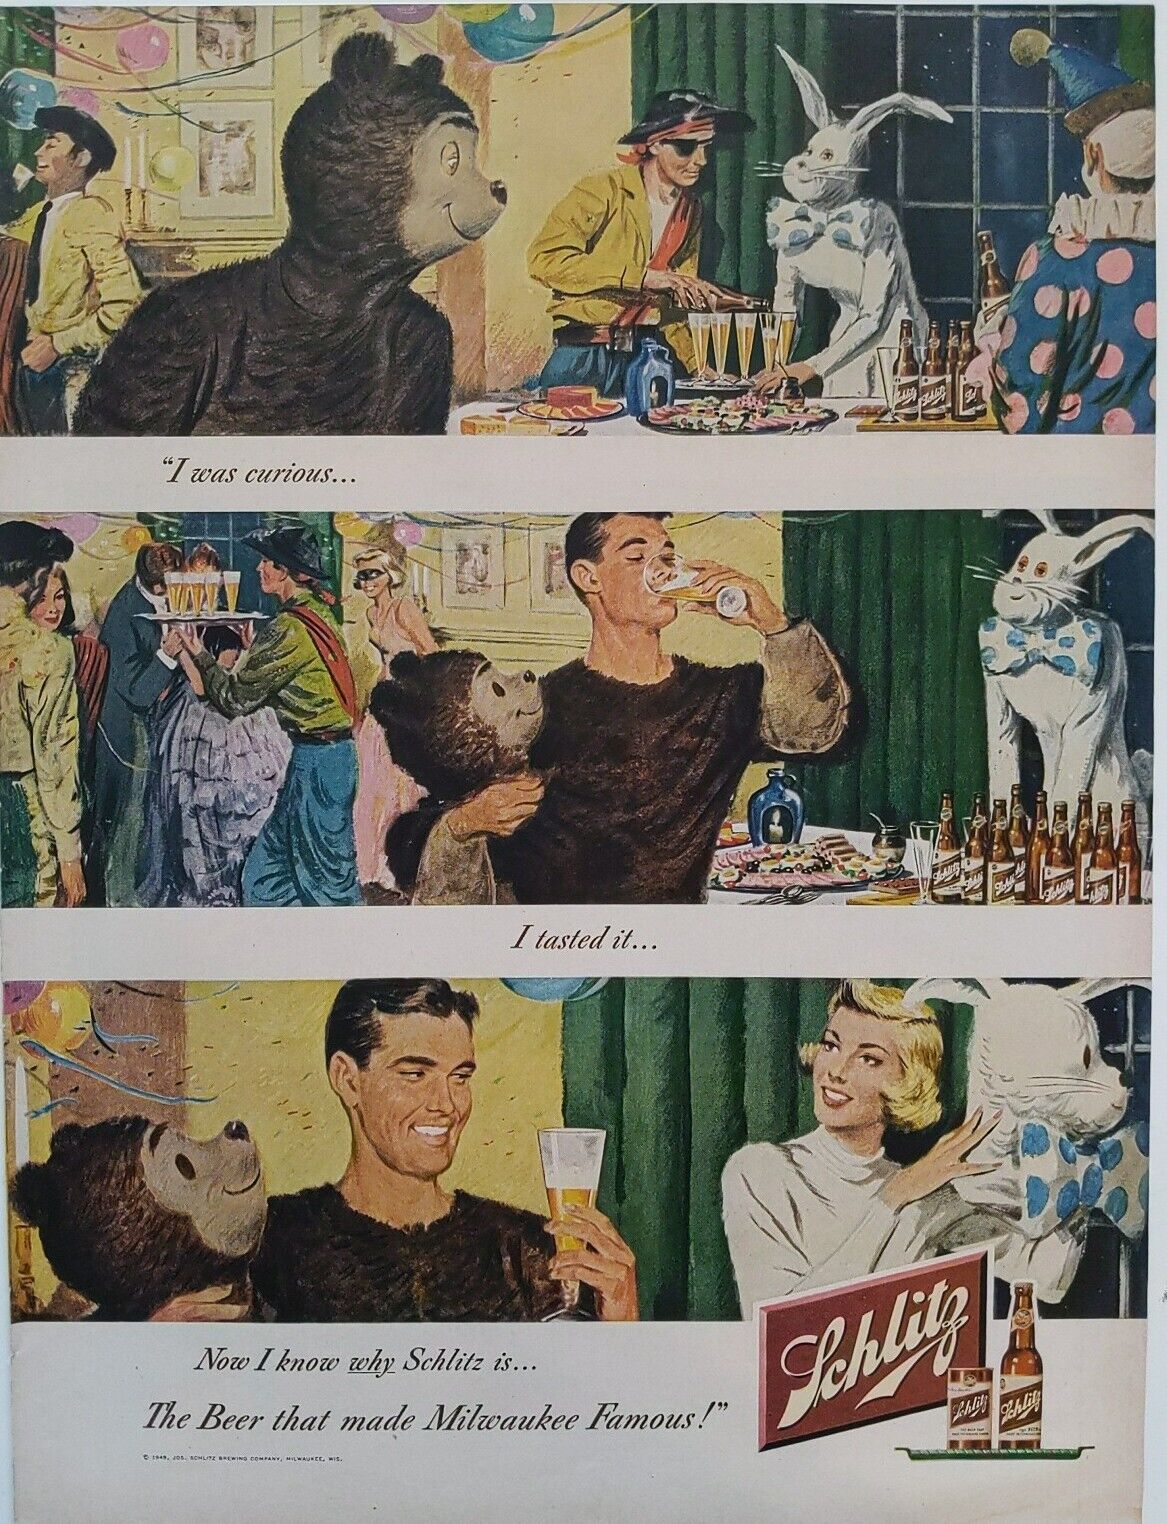 1949 vintage Schlitz beer ad. the beer that made Milwaukee famous, retro art